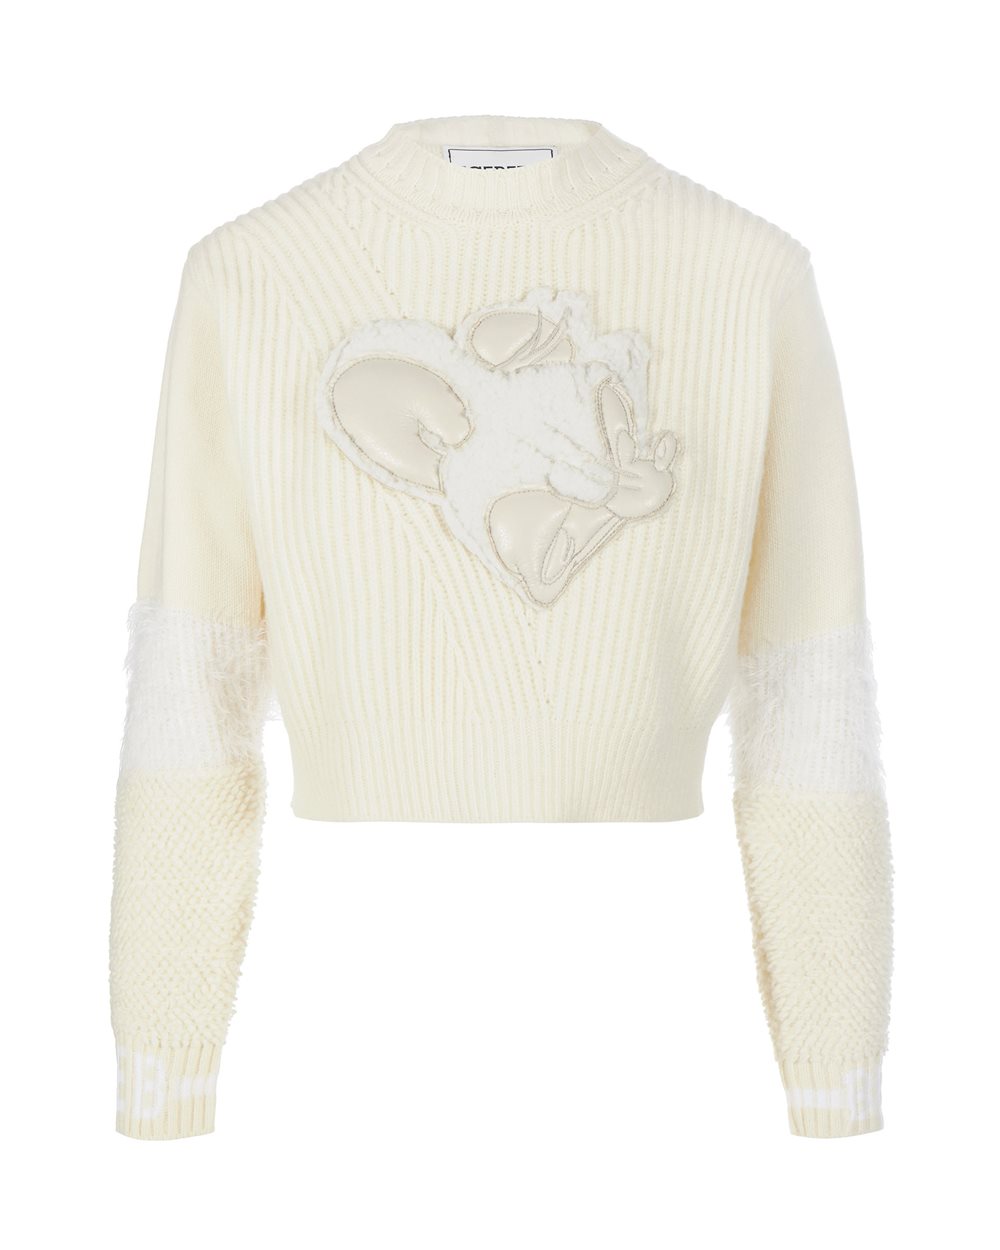 Sweater with cartoon detail - Fashion Show Woman | Iceberg - Official Website